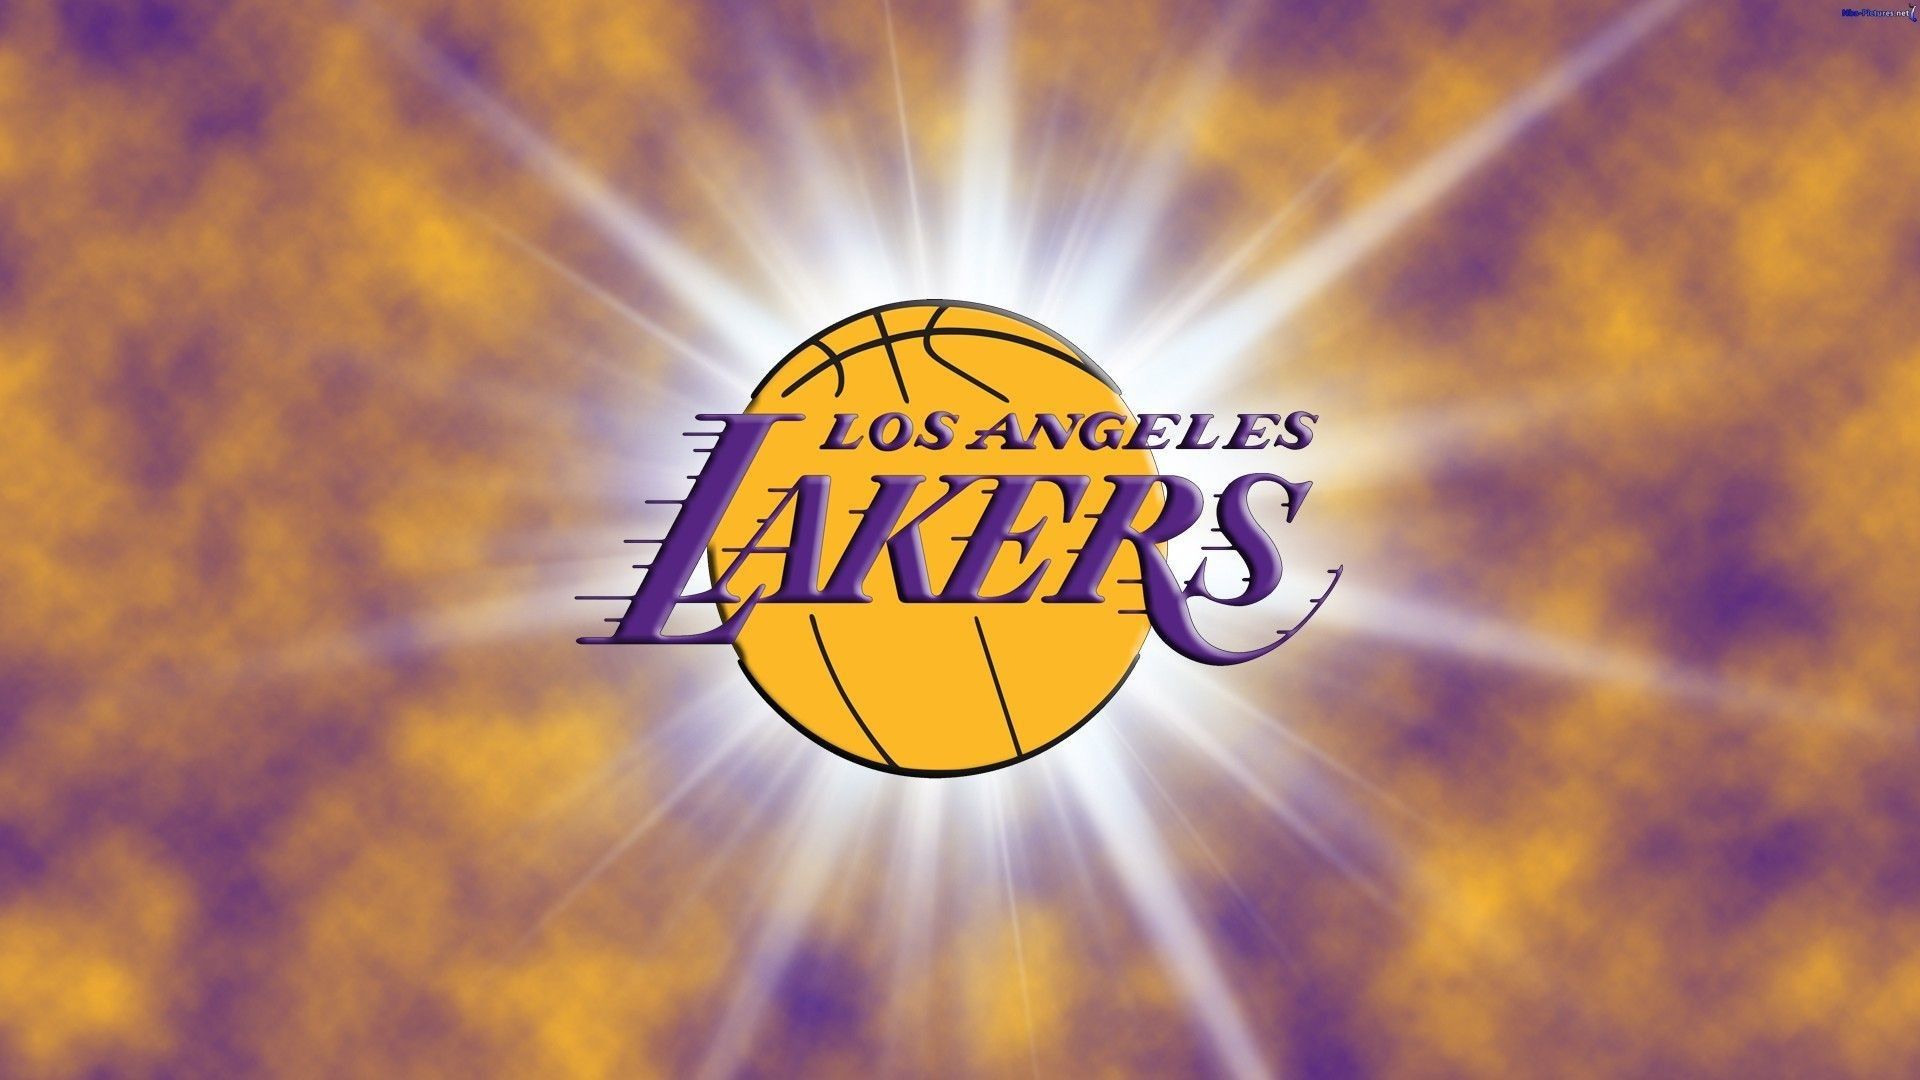 Aggregate los angeles lakers wallpaper best